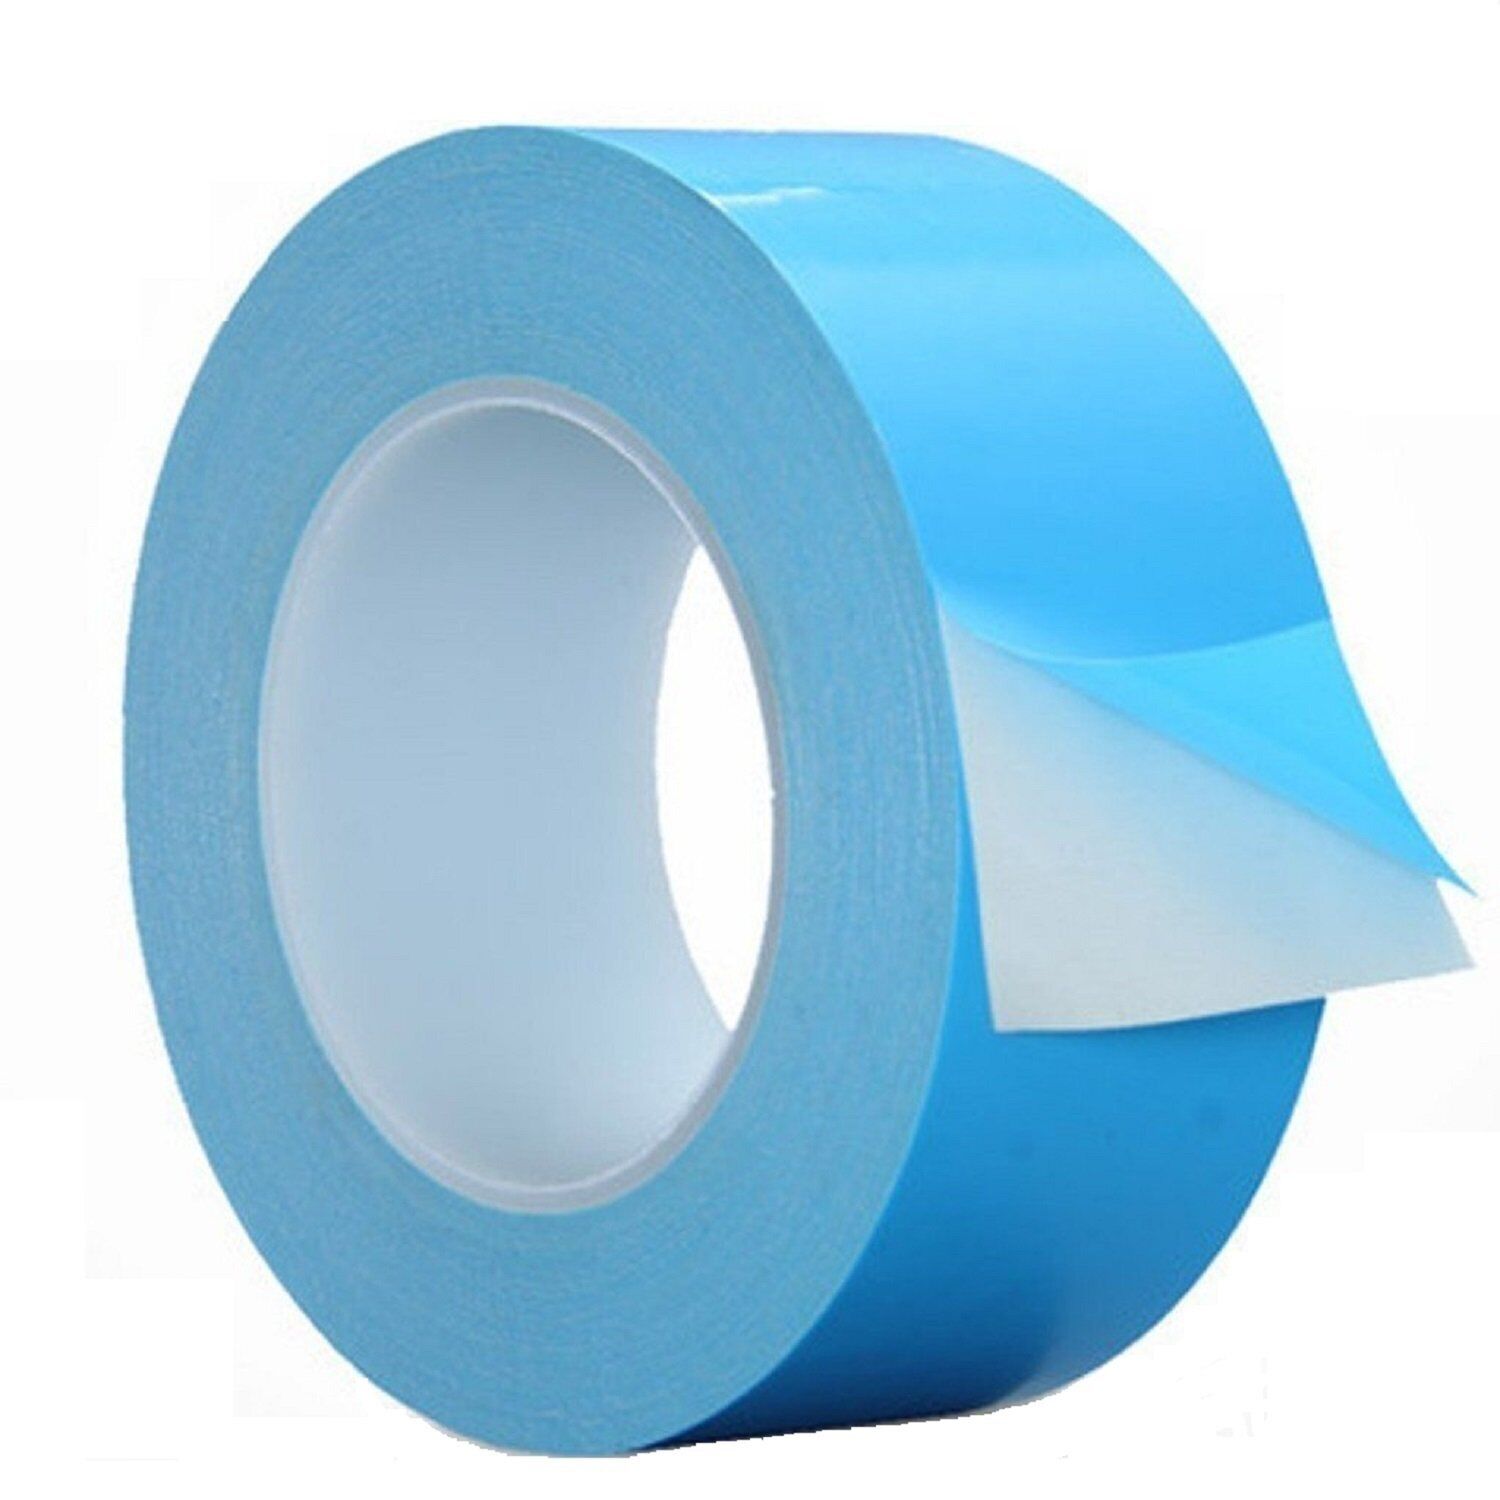 HPFIX Thermal Adhesive Tape 30mm by 25M, High Performance Thermally Conductive T